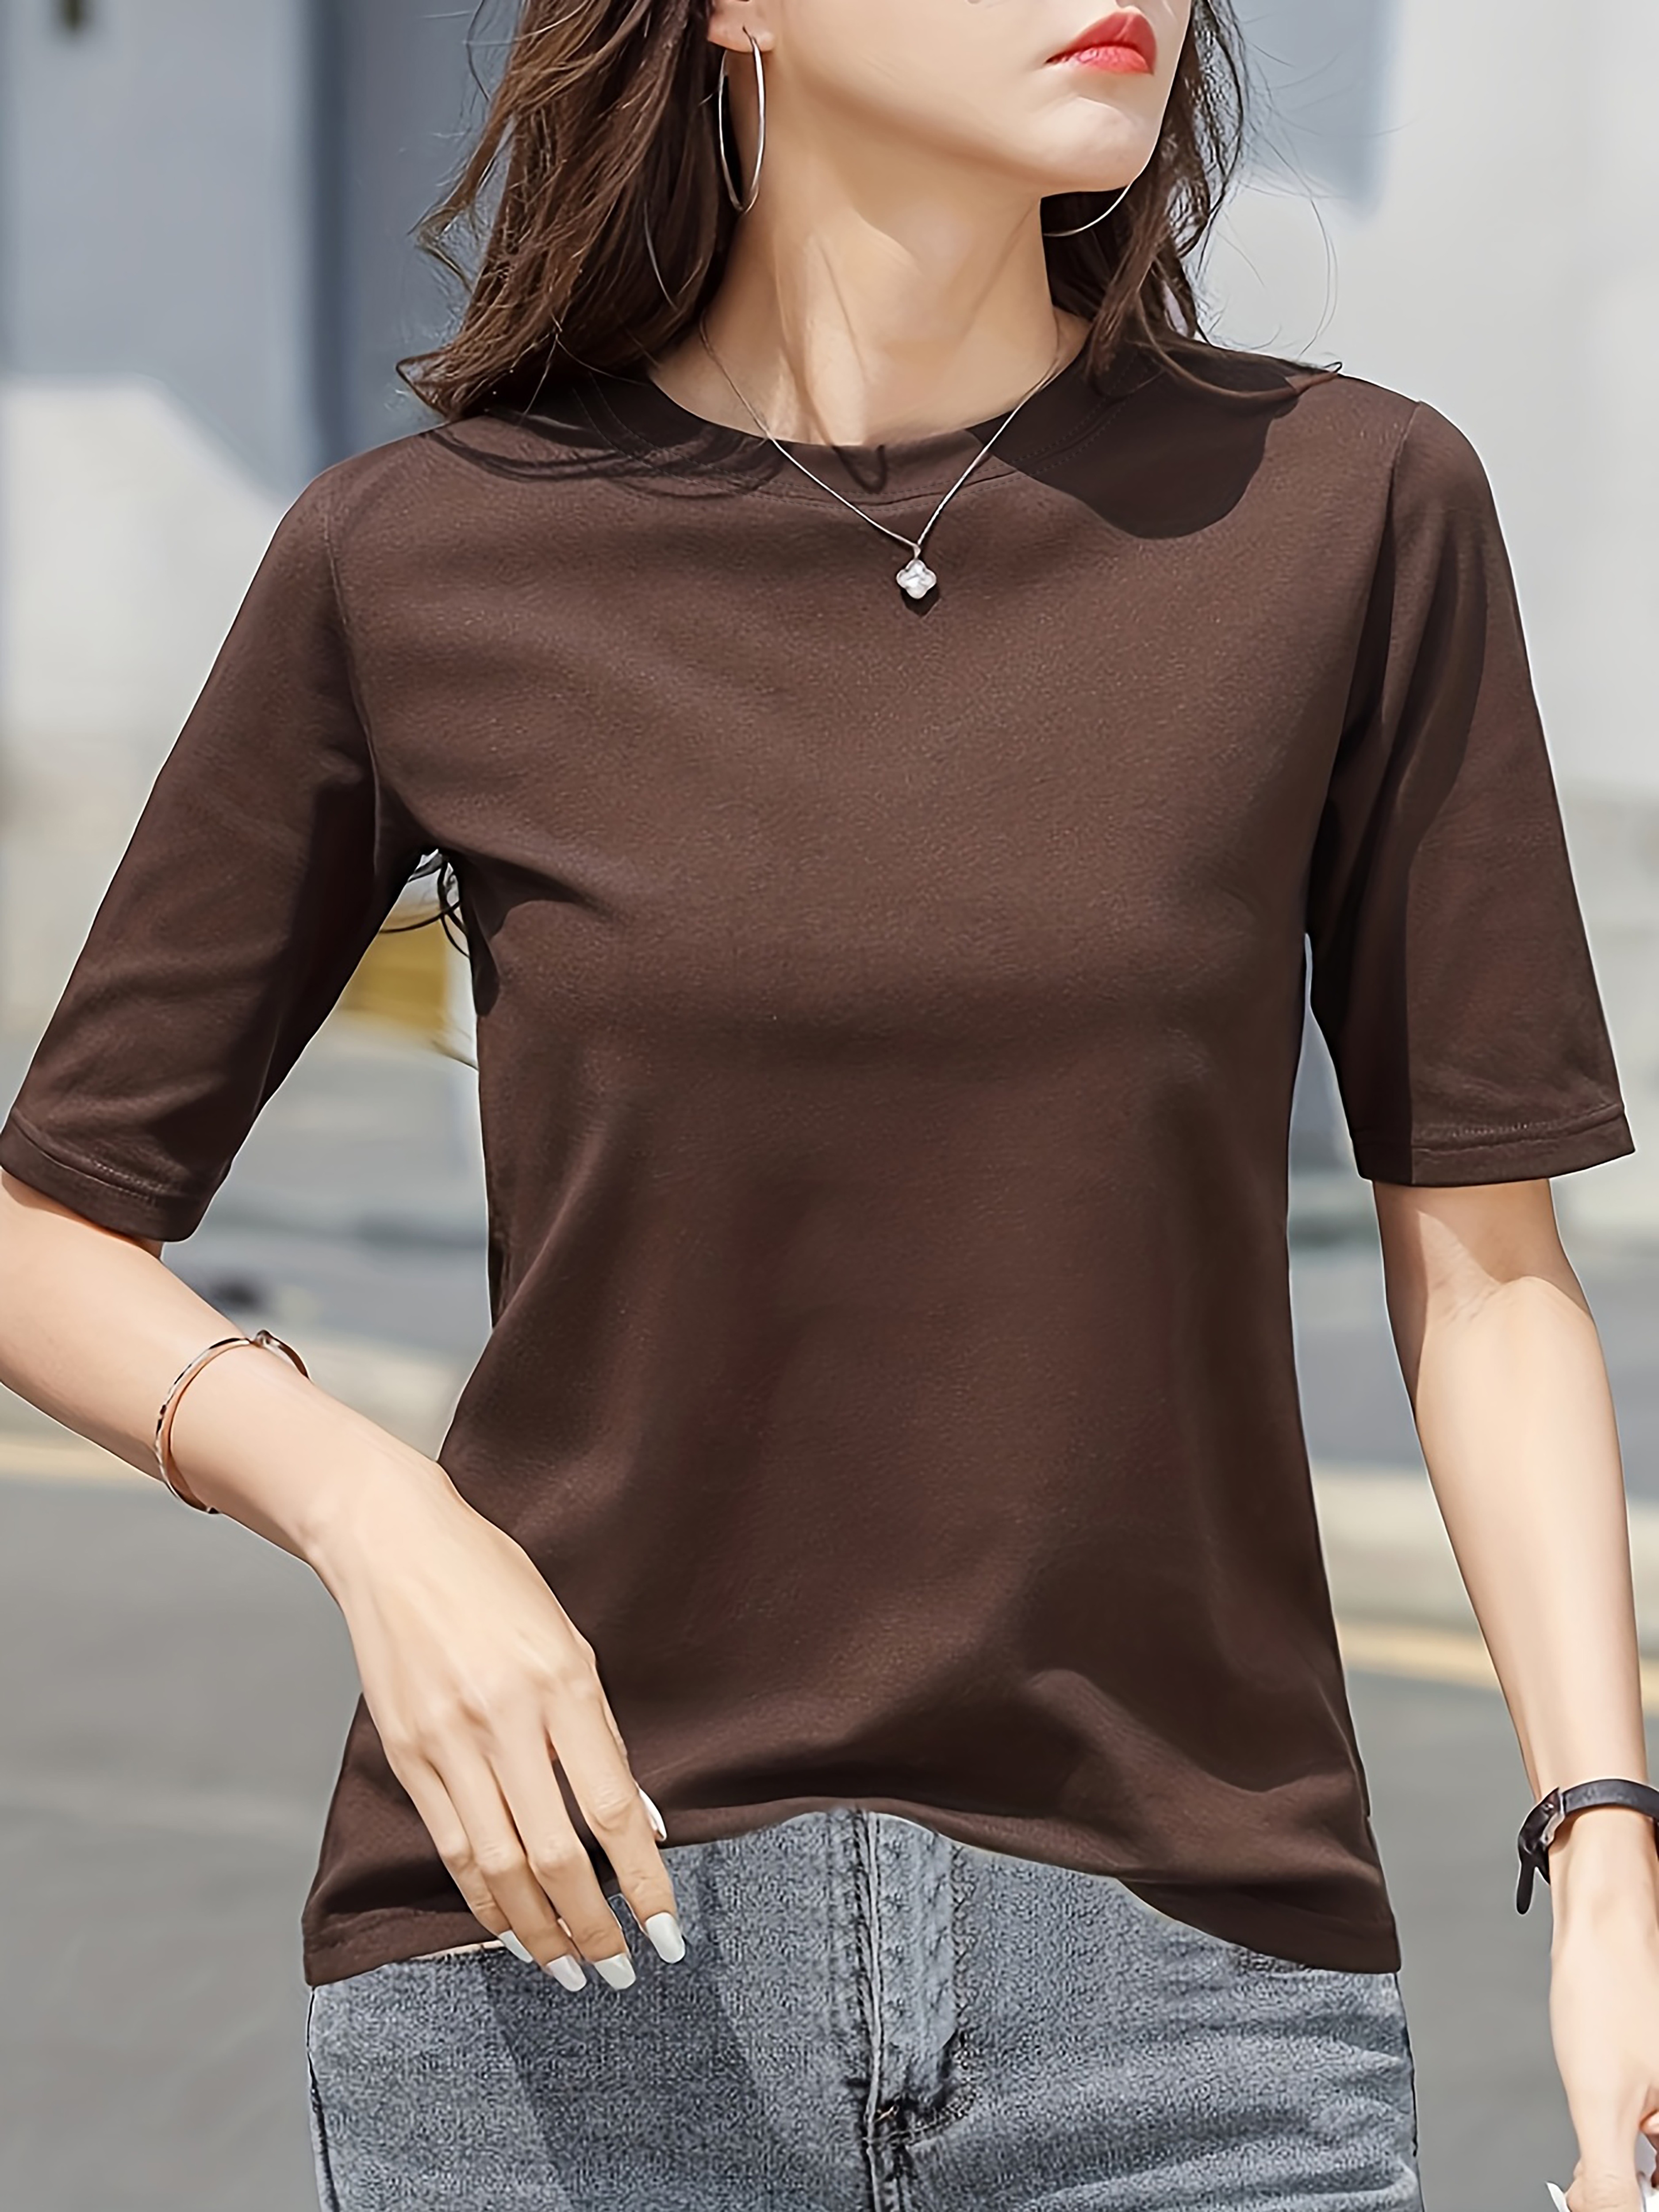 Solid Color Crew Neck Cotton Blend T-shirt, Blouses, Tee, Women's Short Sleeve Crew Neck Casual Top For Summer Spring Women's Clothing T-shirt